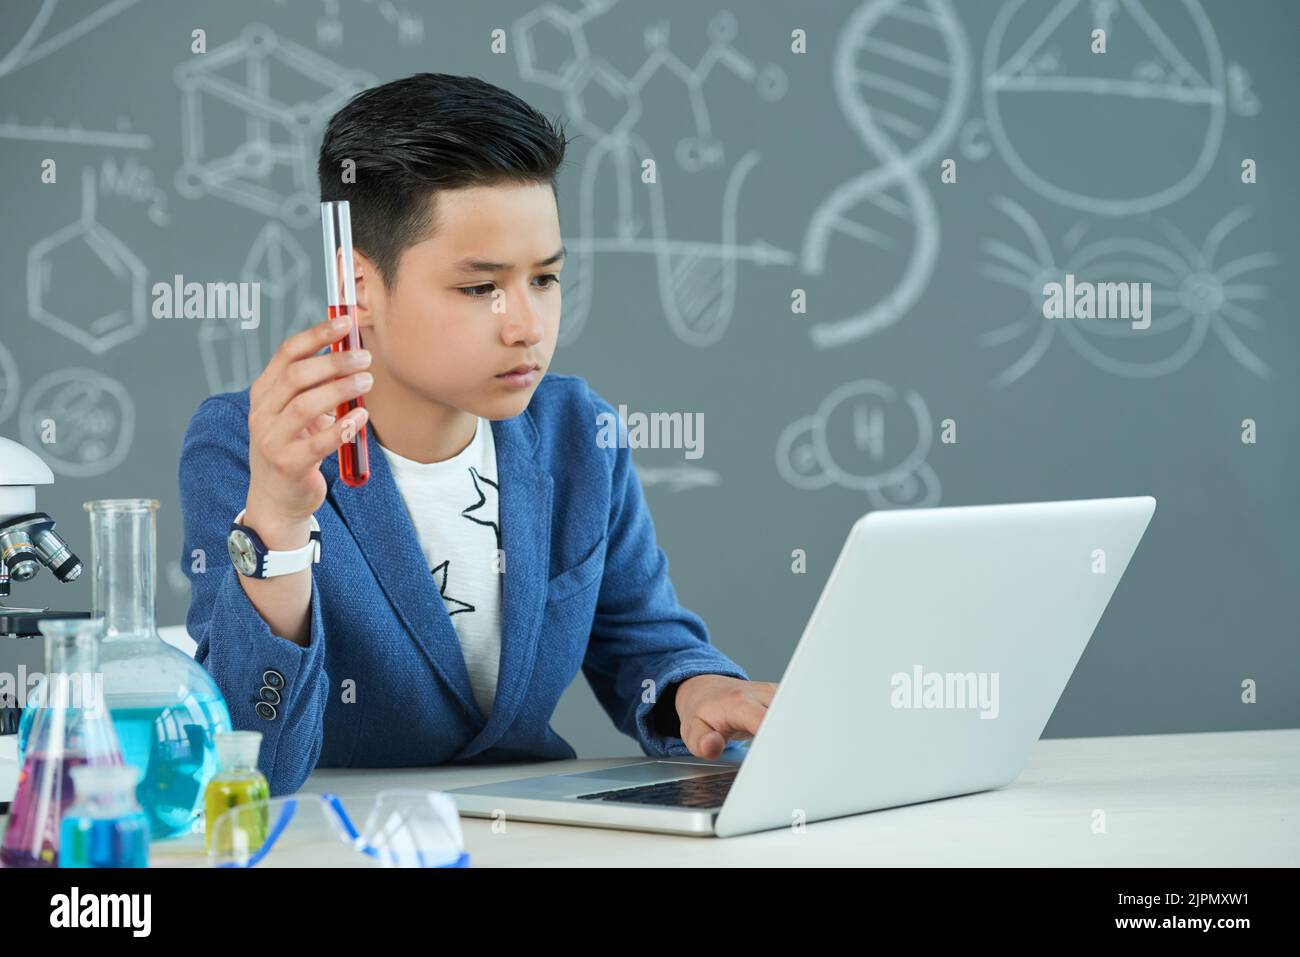 Confident Asian student sitting in front of modern laptop and finishing school research project at chemistry classroom, he holding test tube in hand Stock Photo